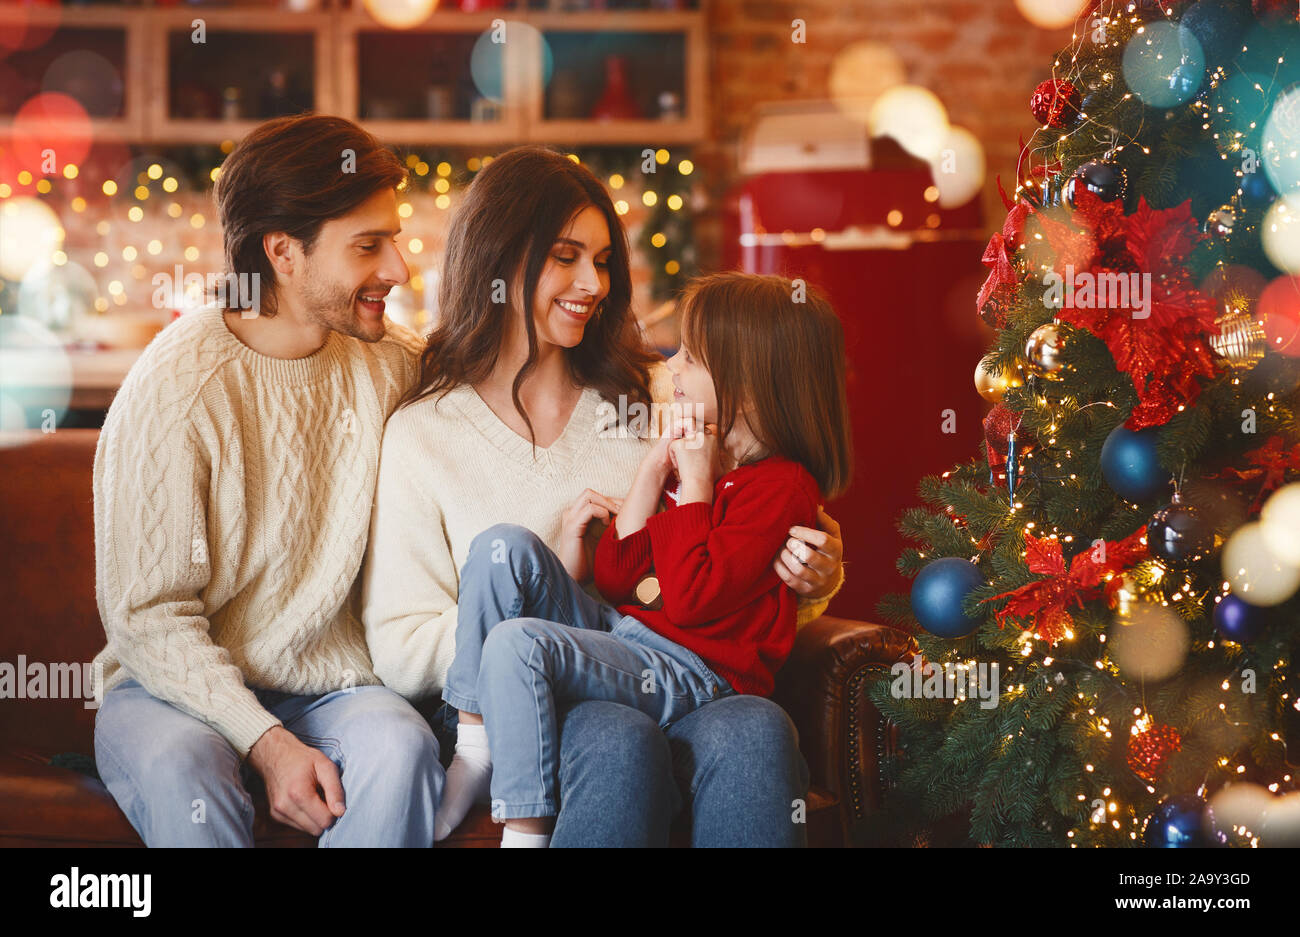 Friendly family spending winter holidays Christmas, New Year together Stock Photo